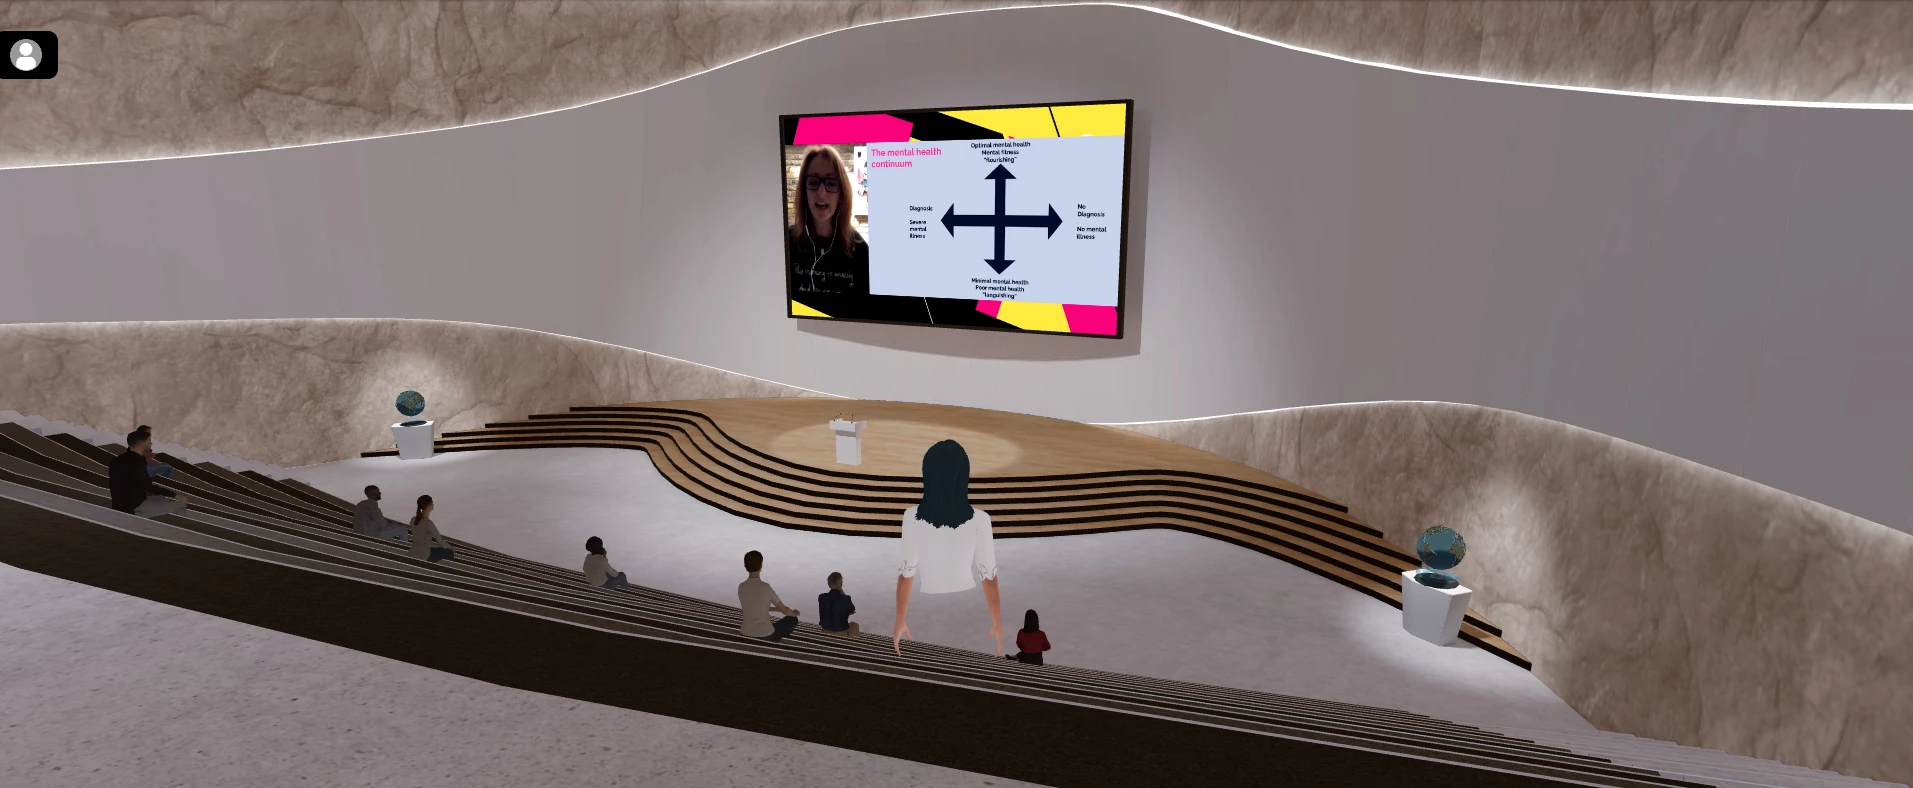 The image is from Flox, a company whose platform allows you to host events virtually in the metaverse. 